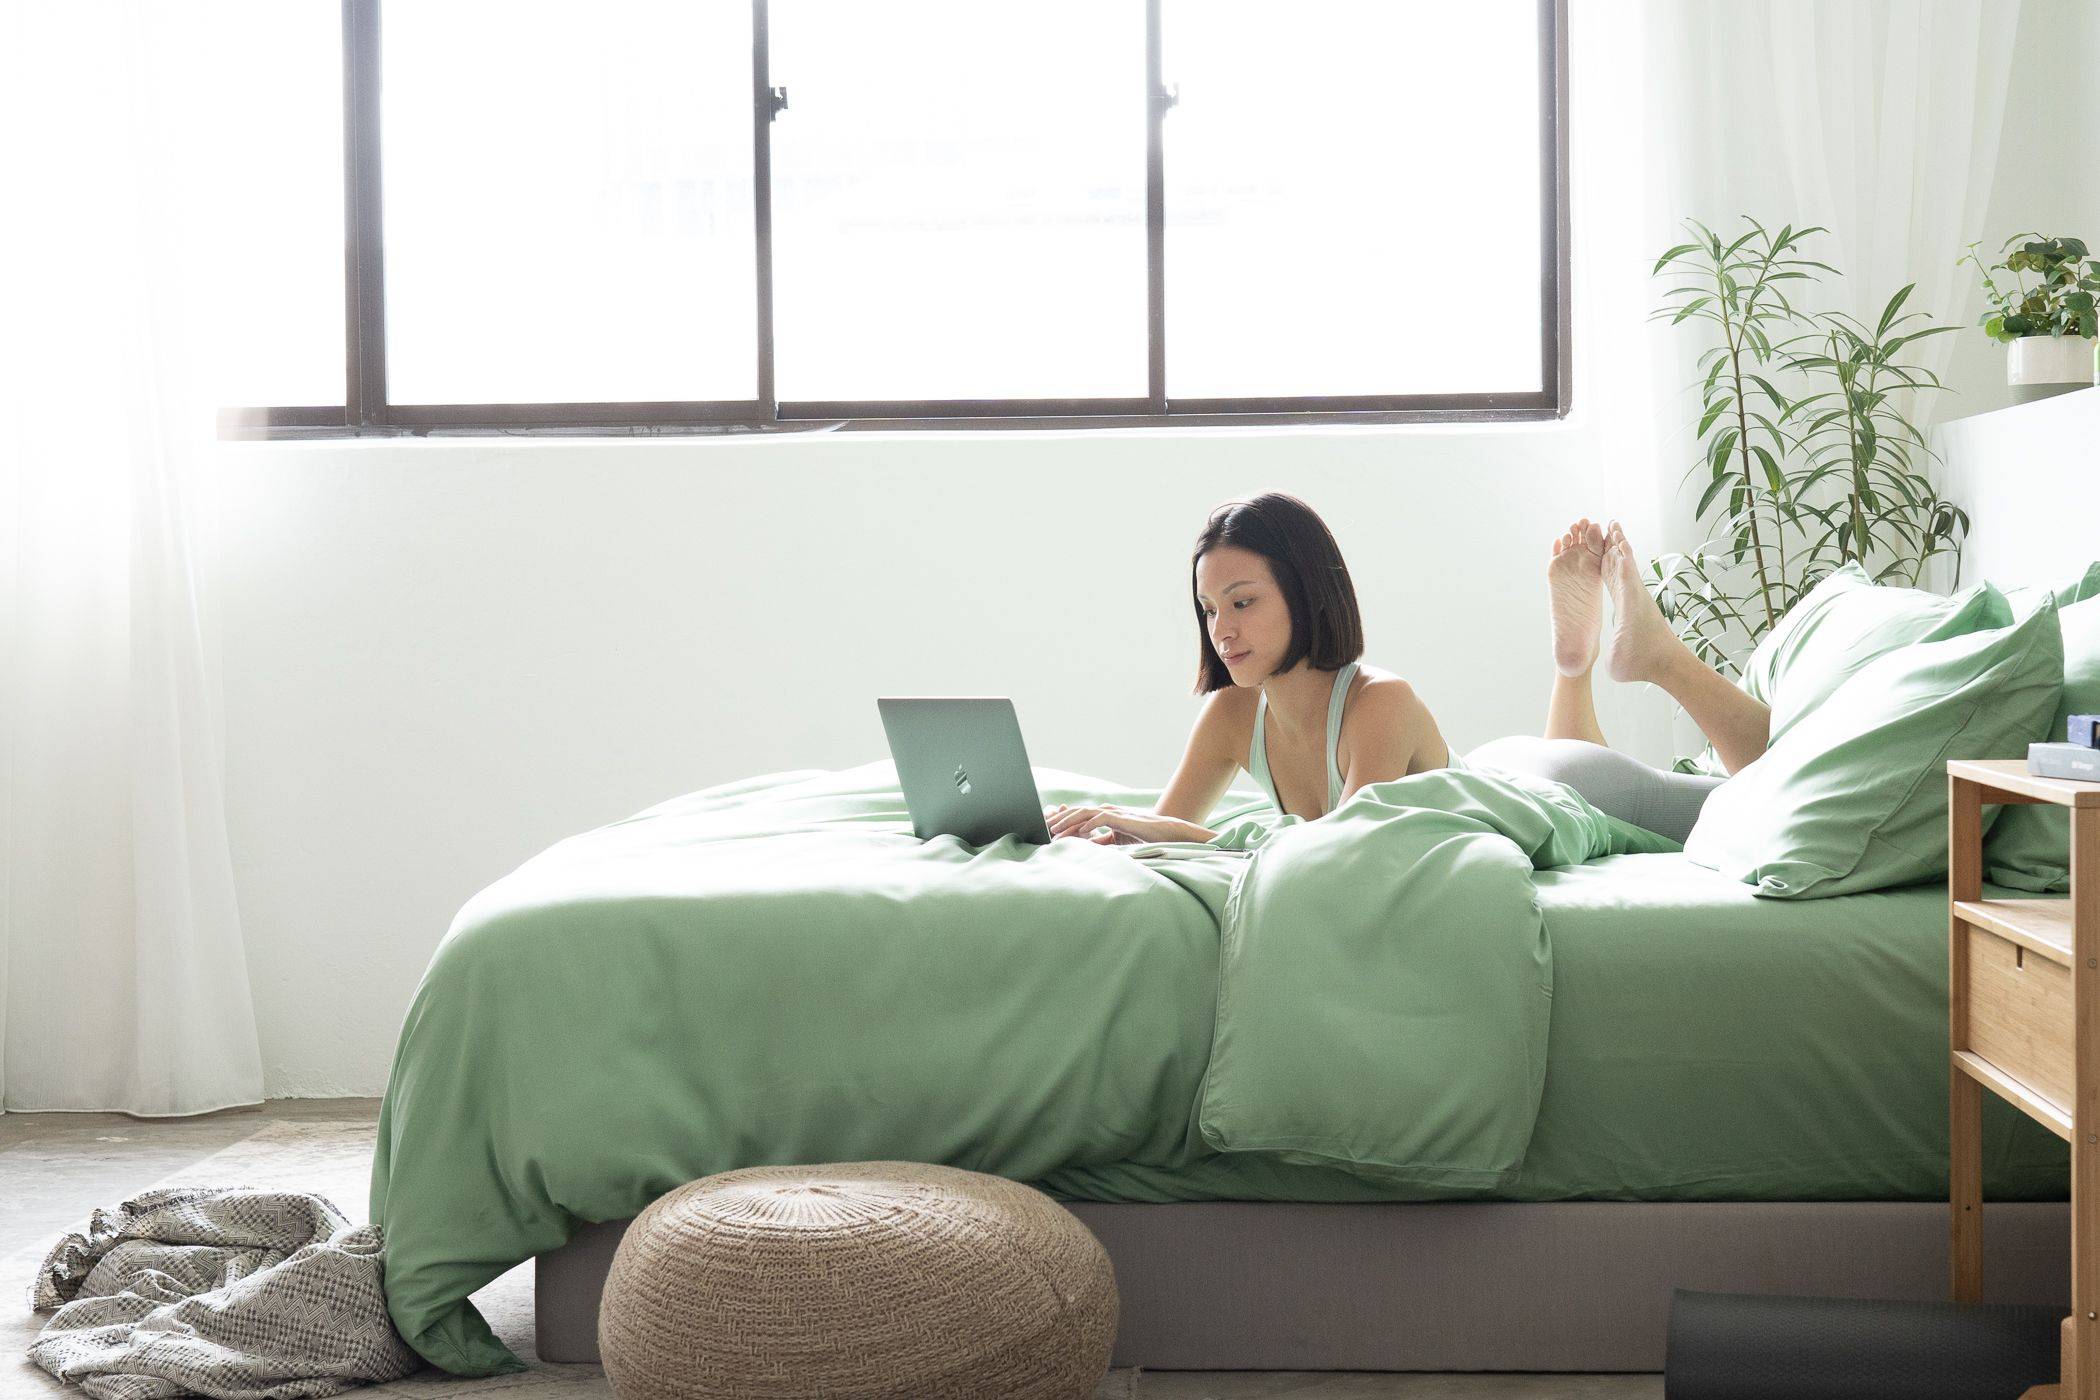 TENCEL vs bamboo bed sheets what's the difference and which you should buy featuring girl using laptop on green bed sheets singapore